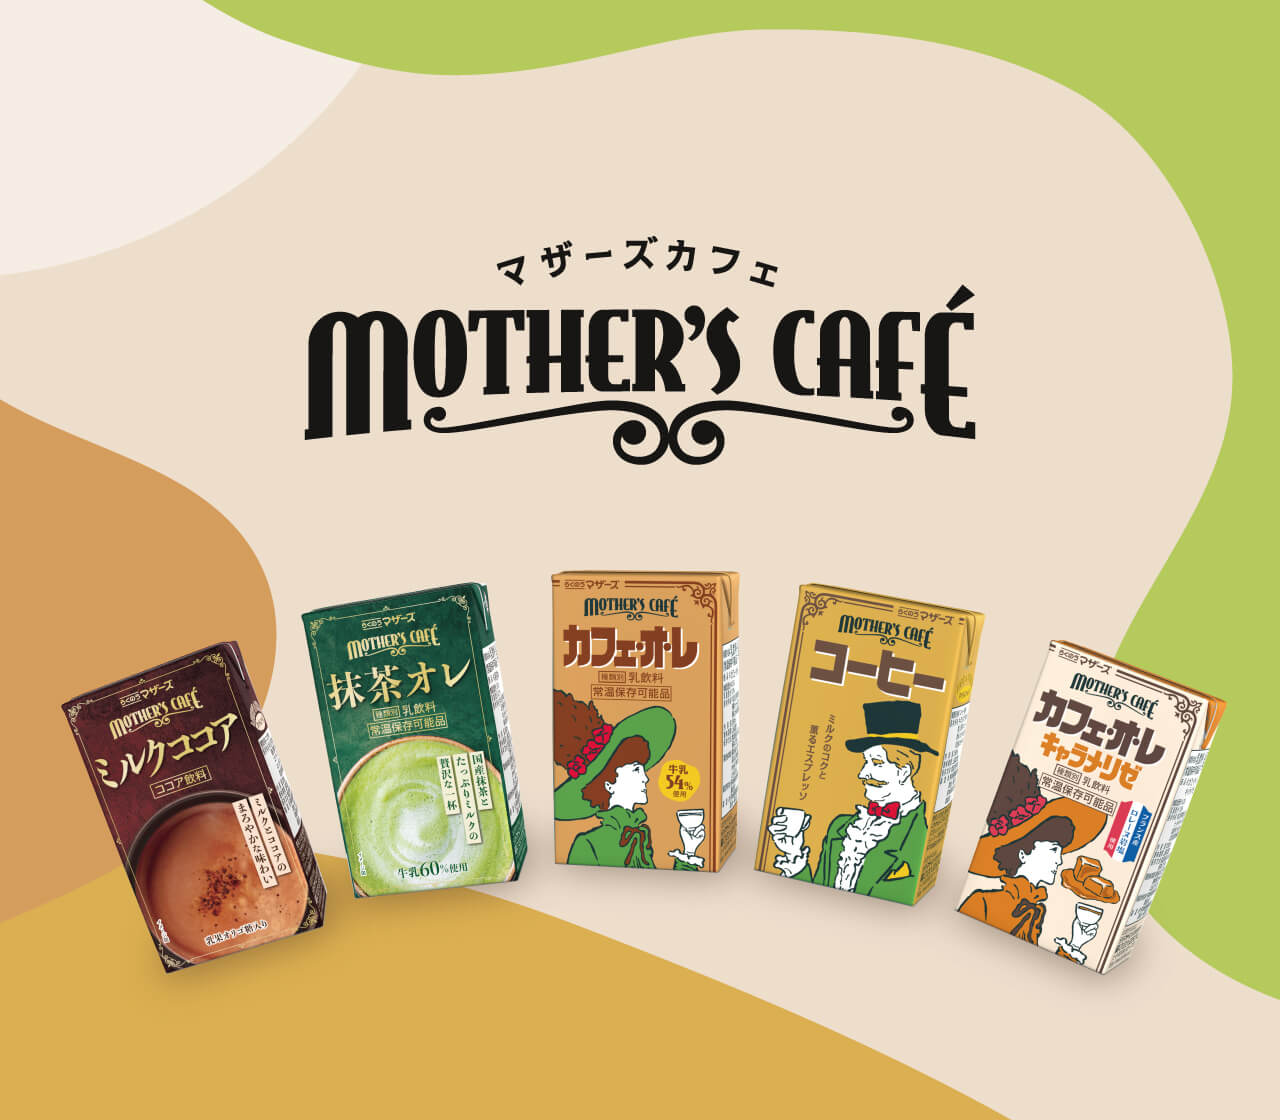 MOTHER'S Cafe